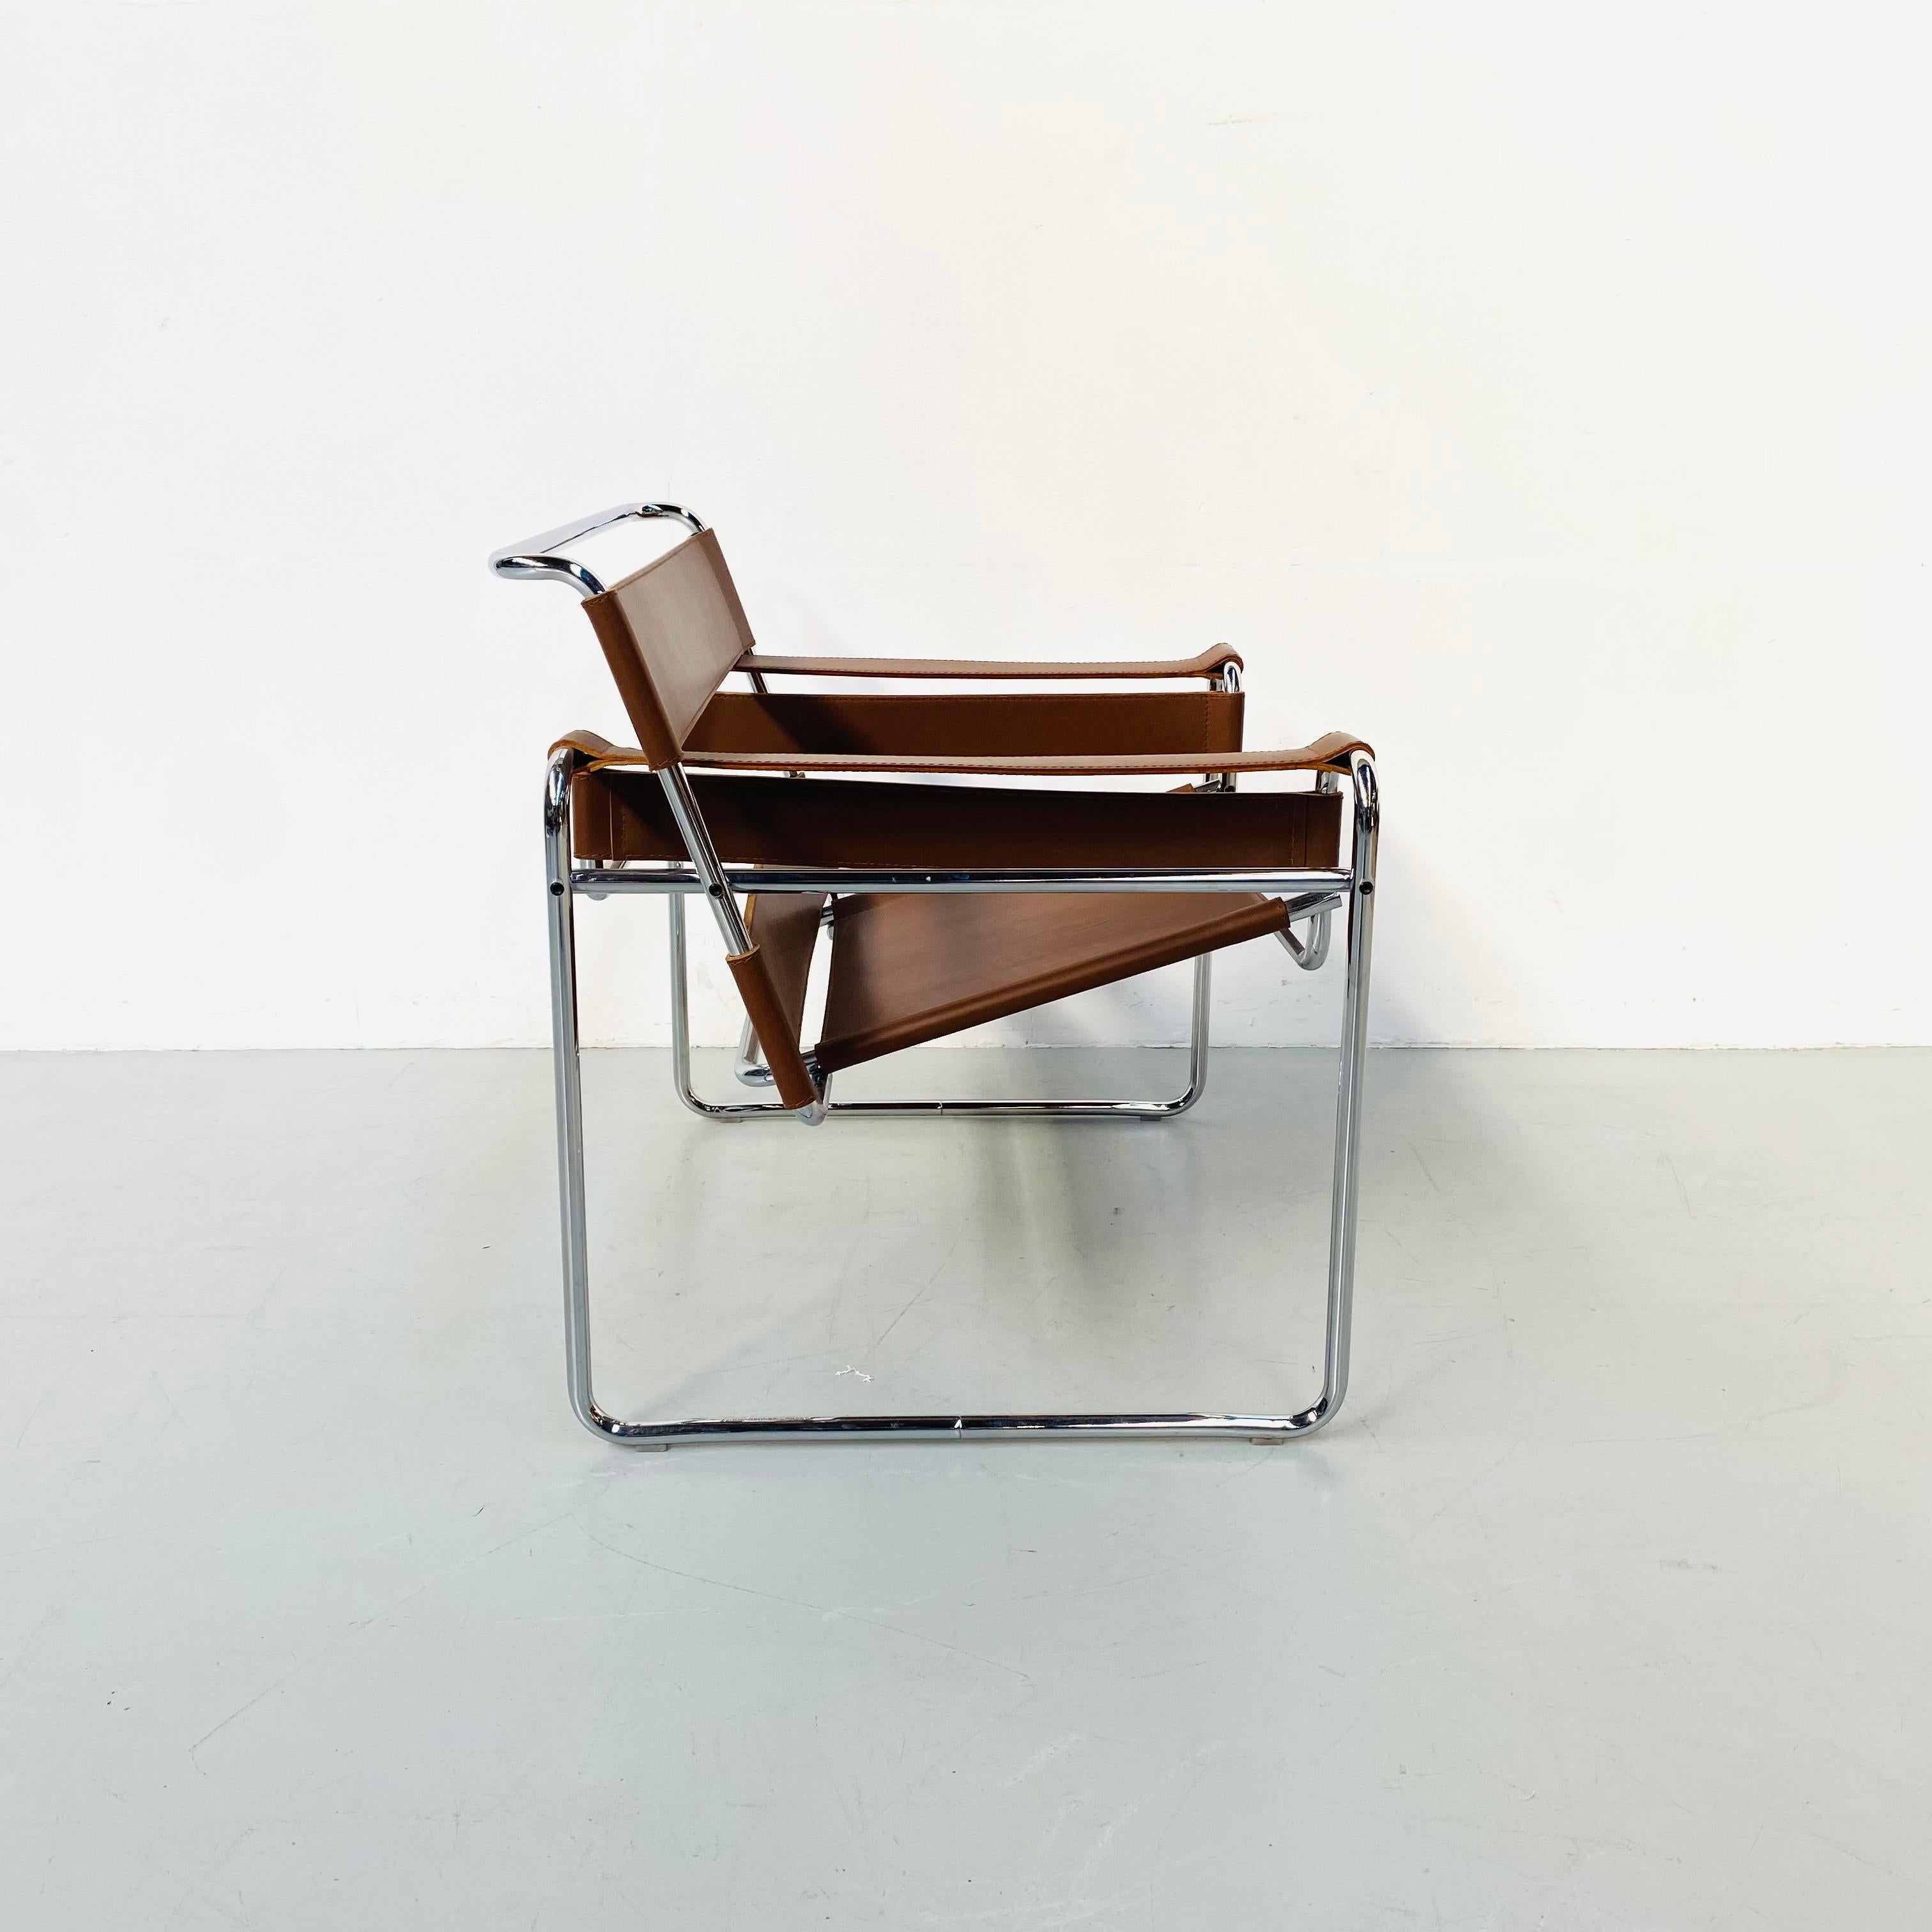 20th Century Cognac Leather B3 Wassily Chair by Marcel Breuer for Knoll Studio, 1980s